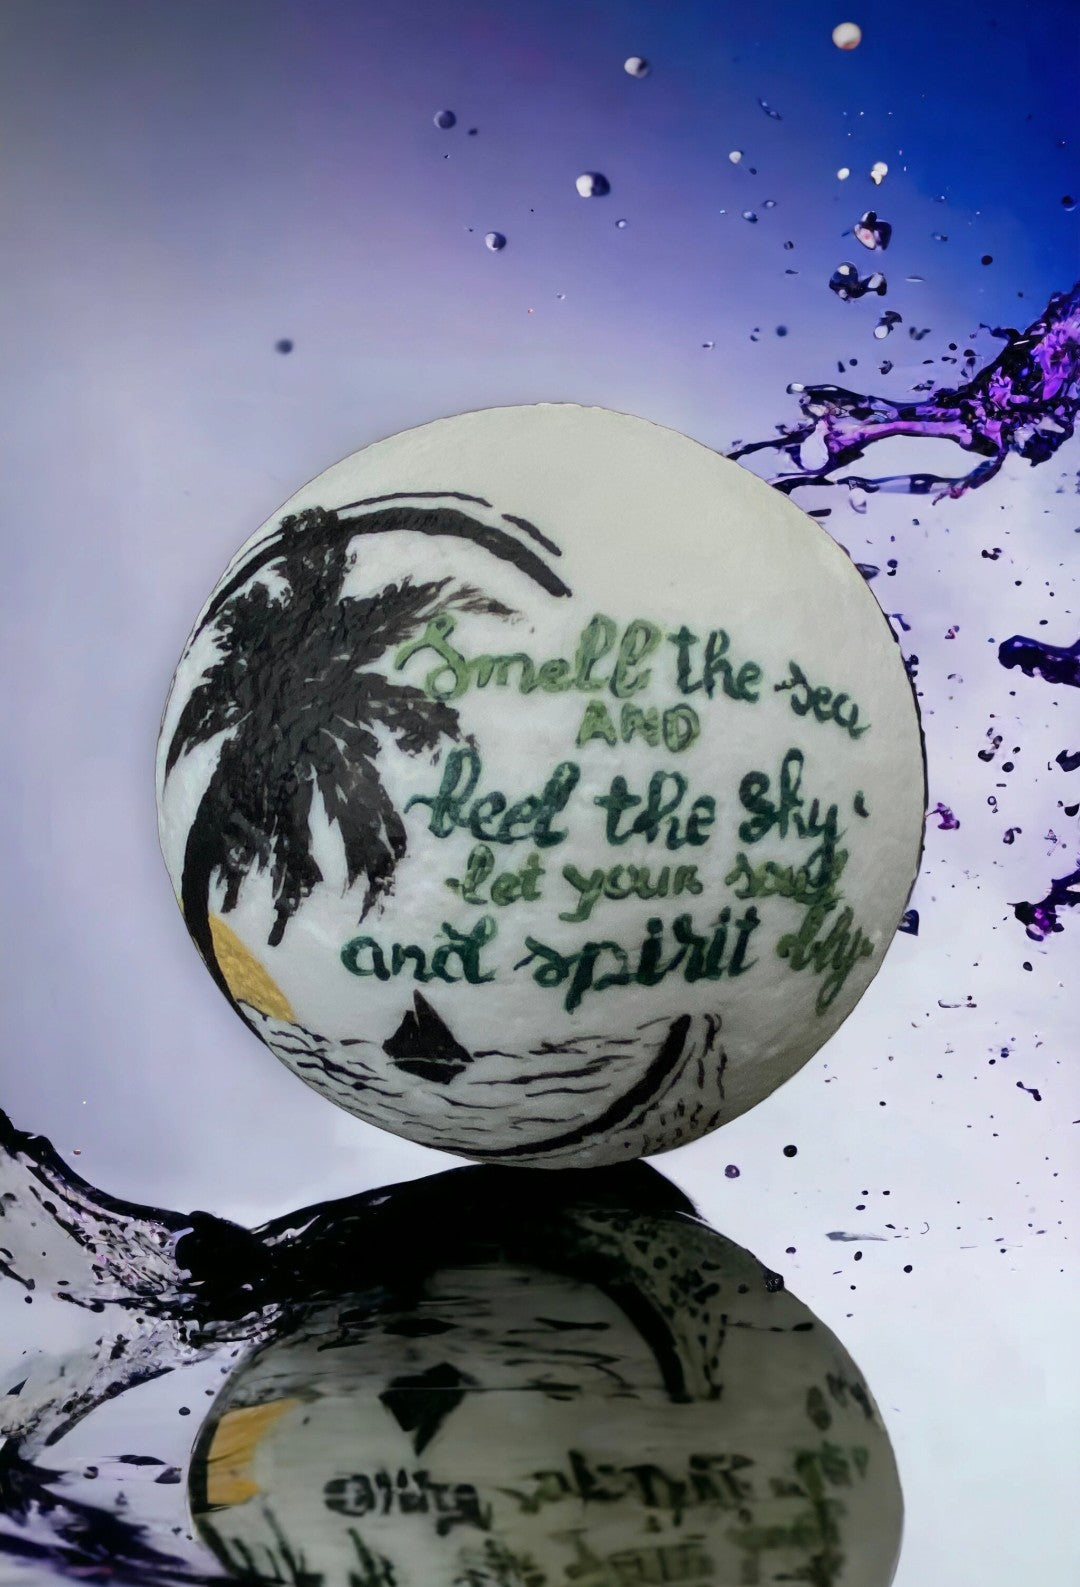 Emerald Blossoms - &quot;Smell the sea and feel the sky. Let your soul and spirit fly&quot; hand painted on moon lamp